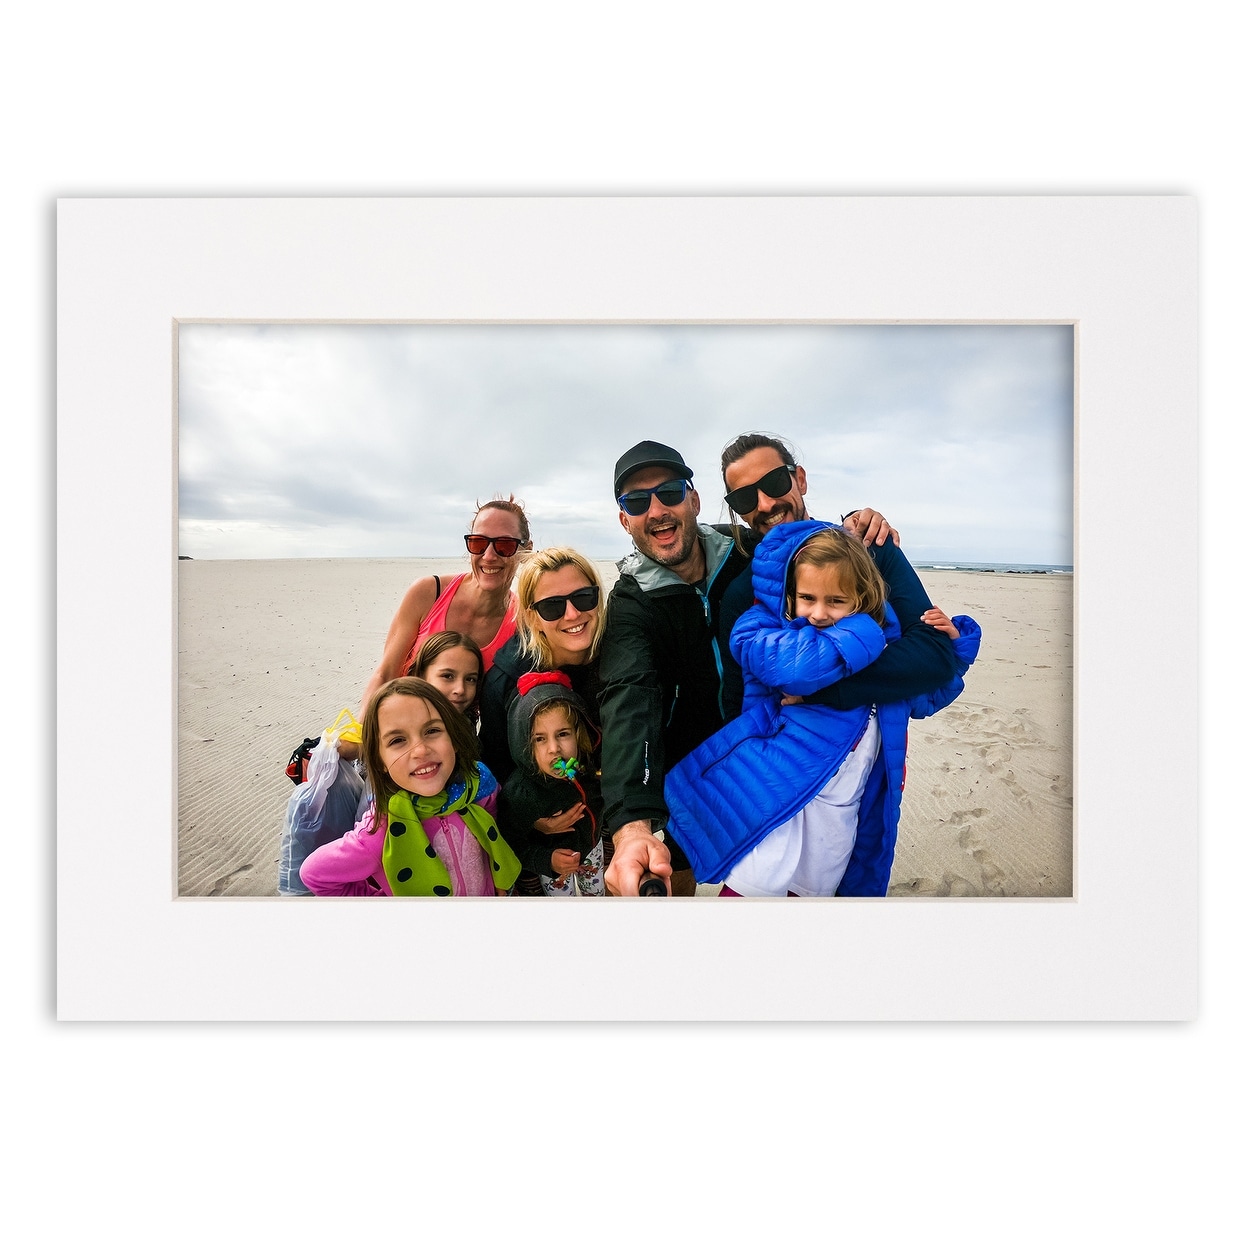 8x10 Mat for 16x20 Frame - Precut Mat Board Acid-Free White 8x10 Photo Matte Made to Fit A 16x20 Picture Frame